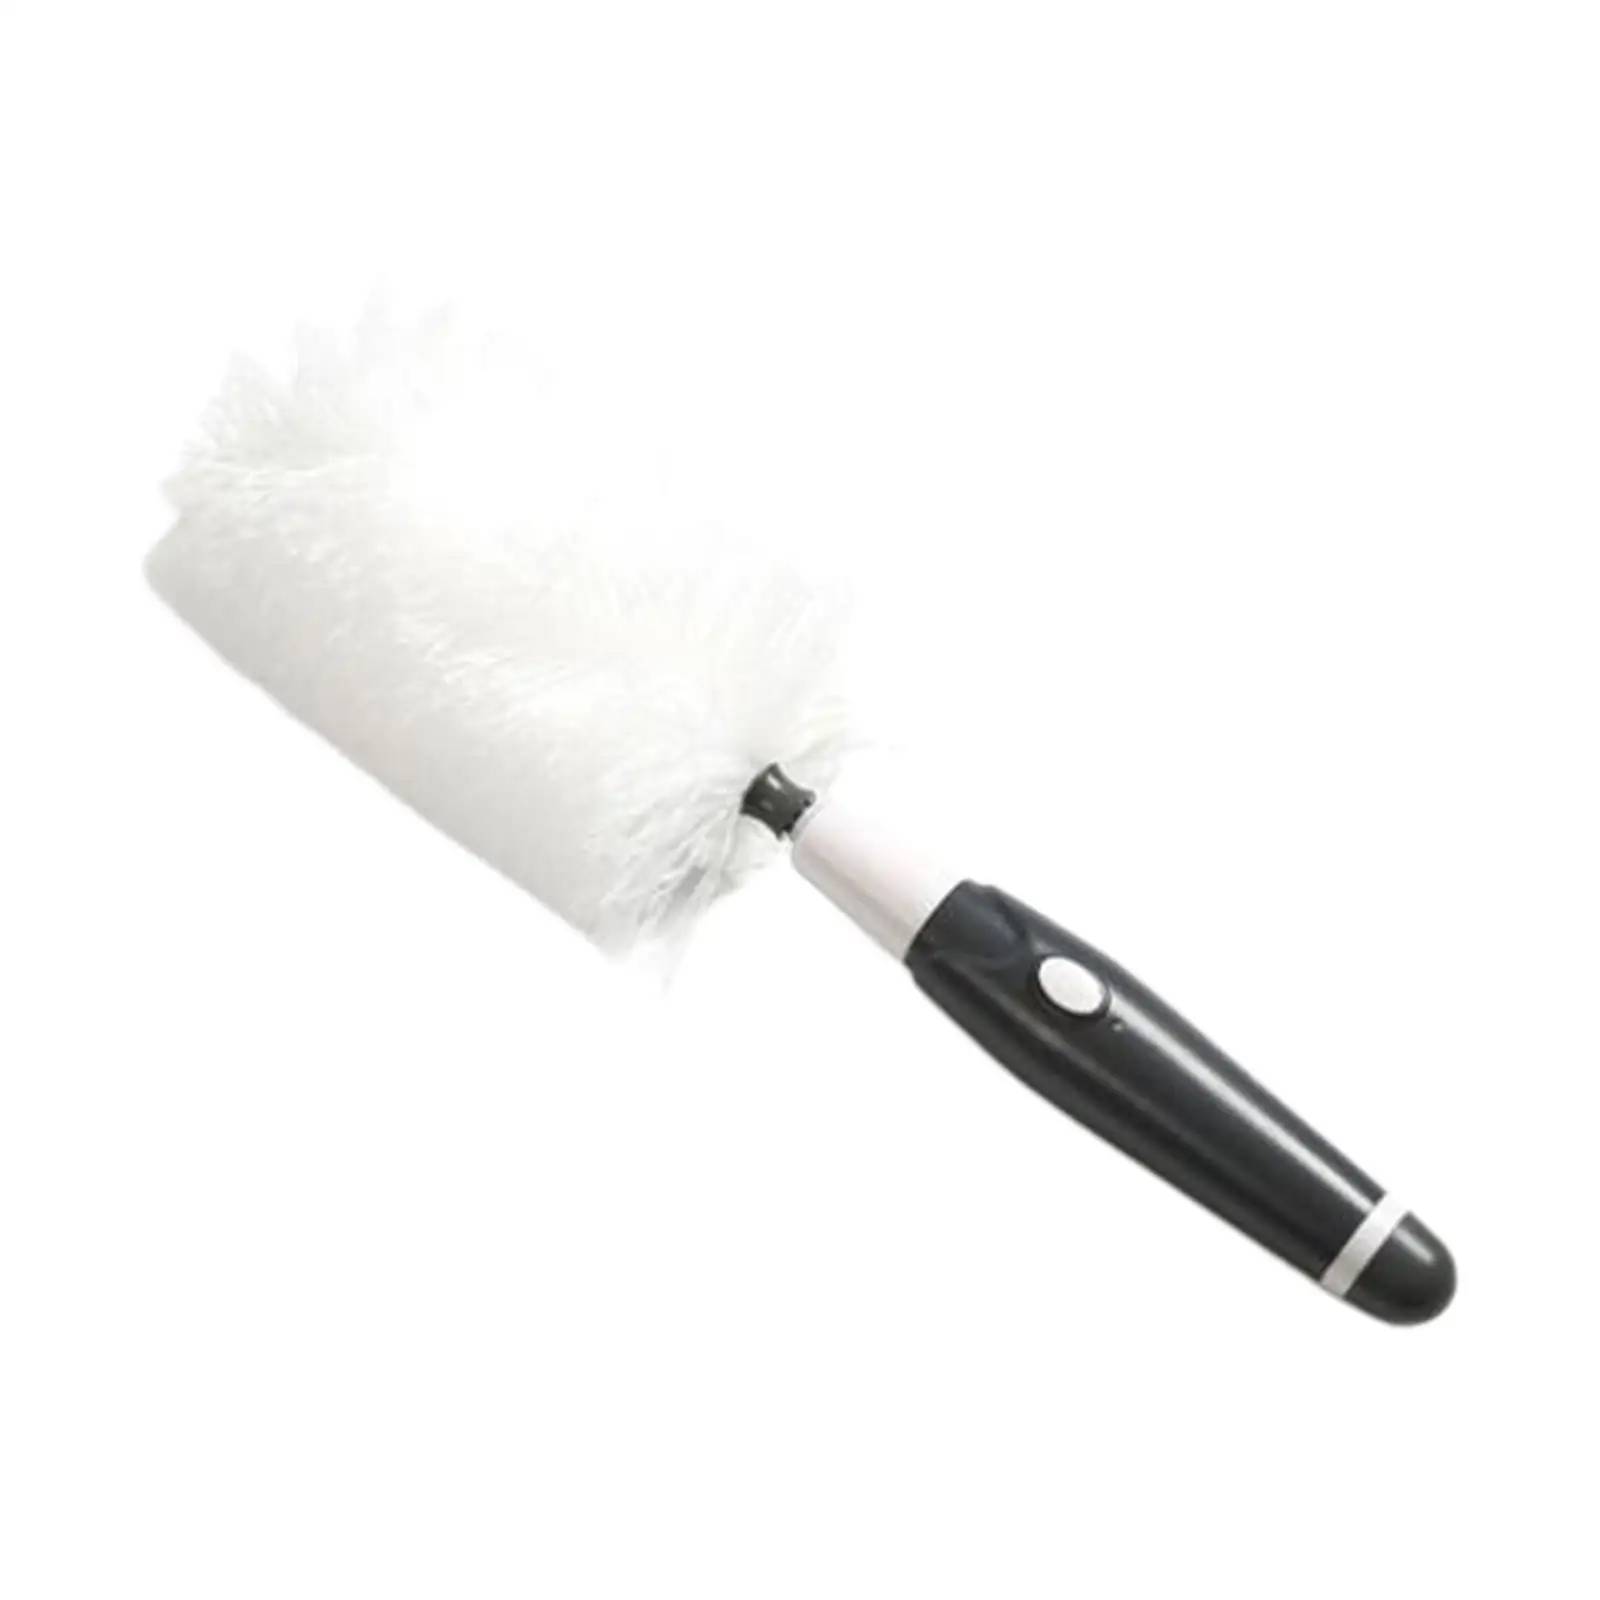 Retractable Dust Remove Brush Telescoping Extension Pole USB 12W Hand Duster Dust Collector Household Brush for Ceiling Fan Cars